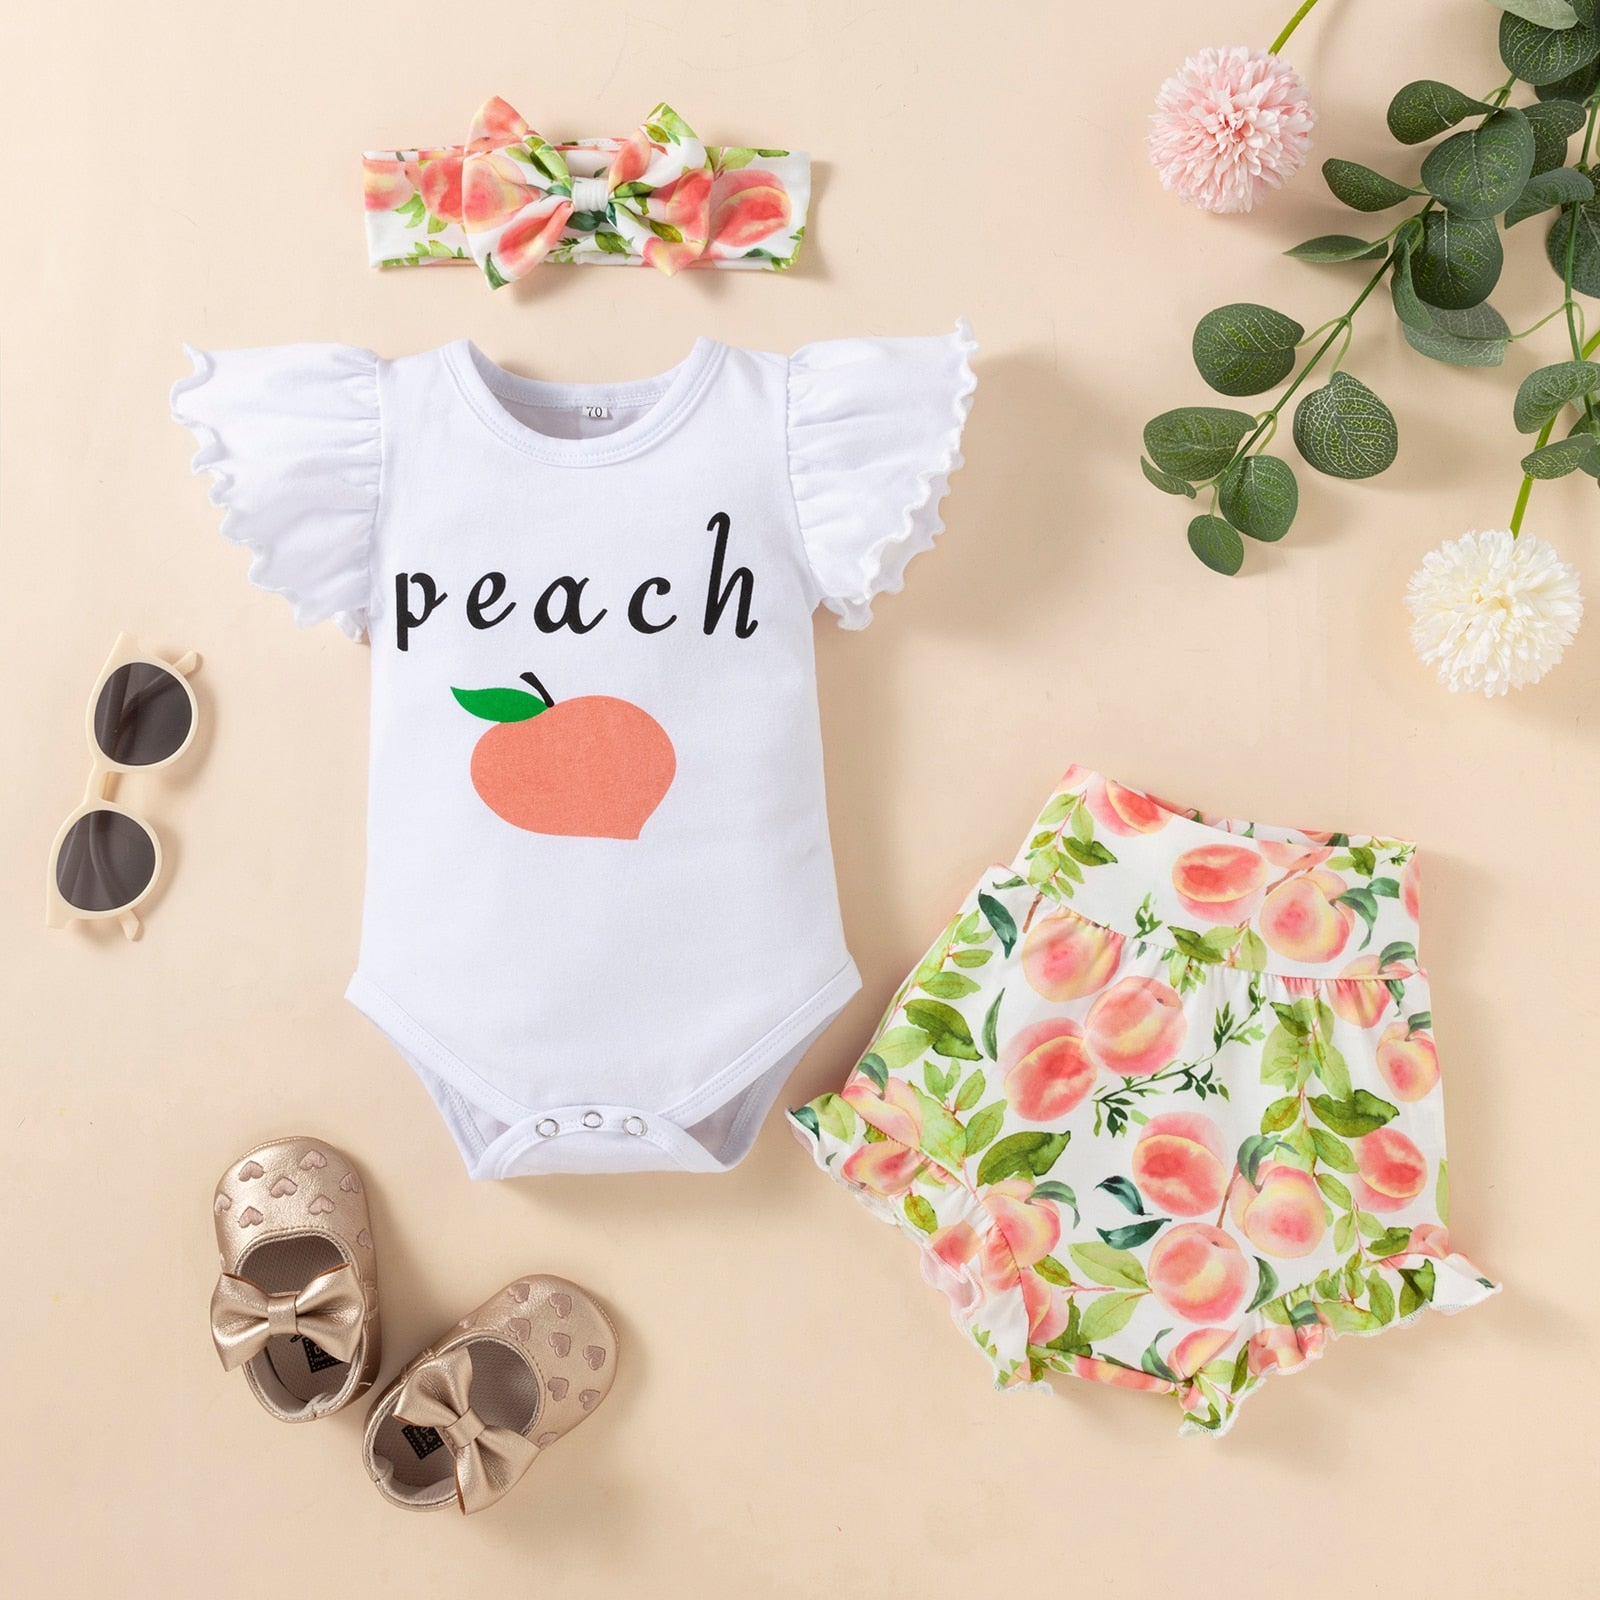 Adorable Summer Baby Girl Outfit Sets with Printed Bodysuit and Cartoon Lobster PP Pants